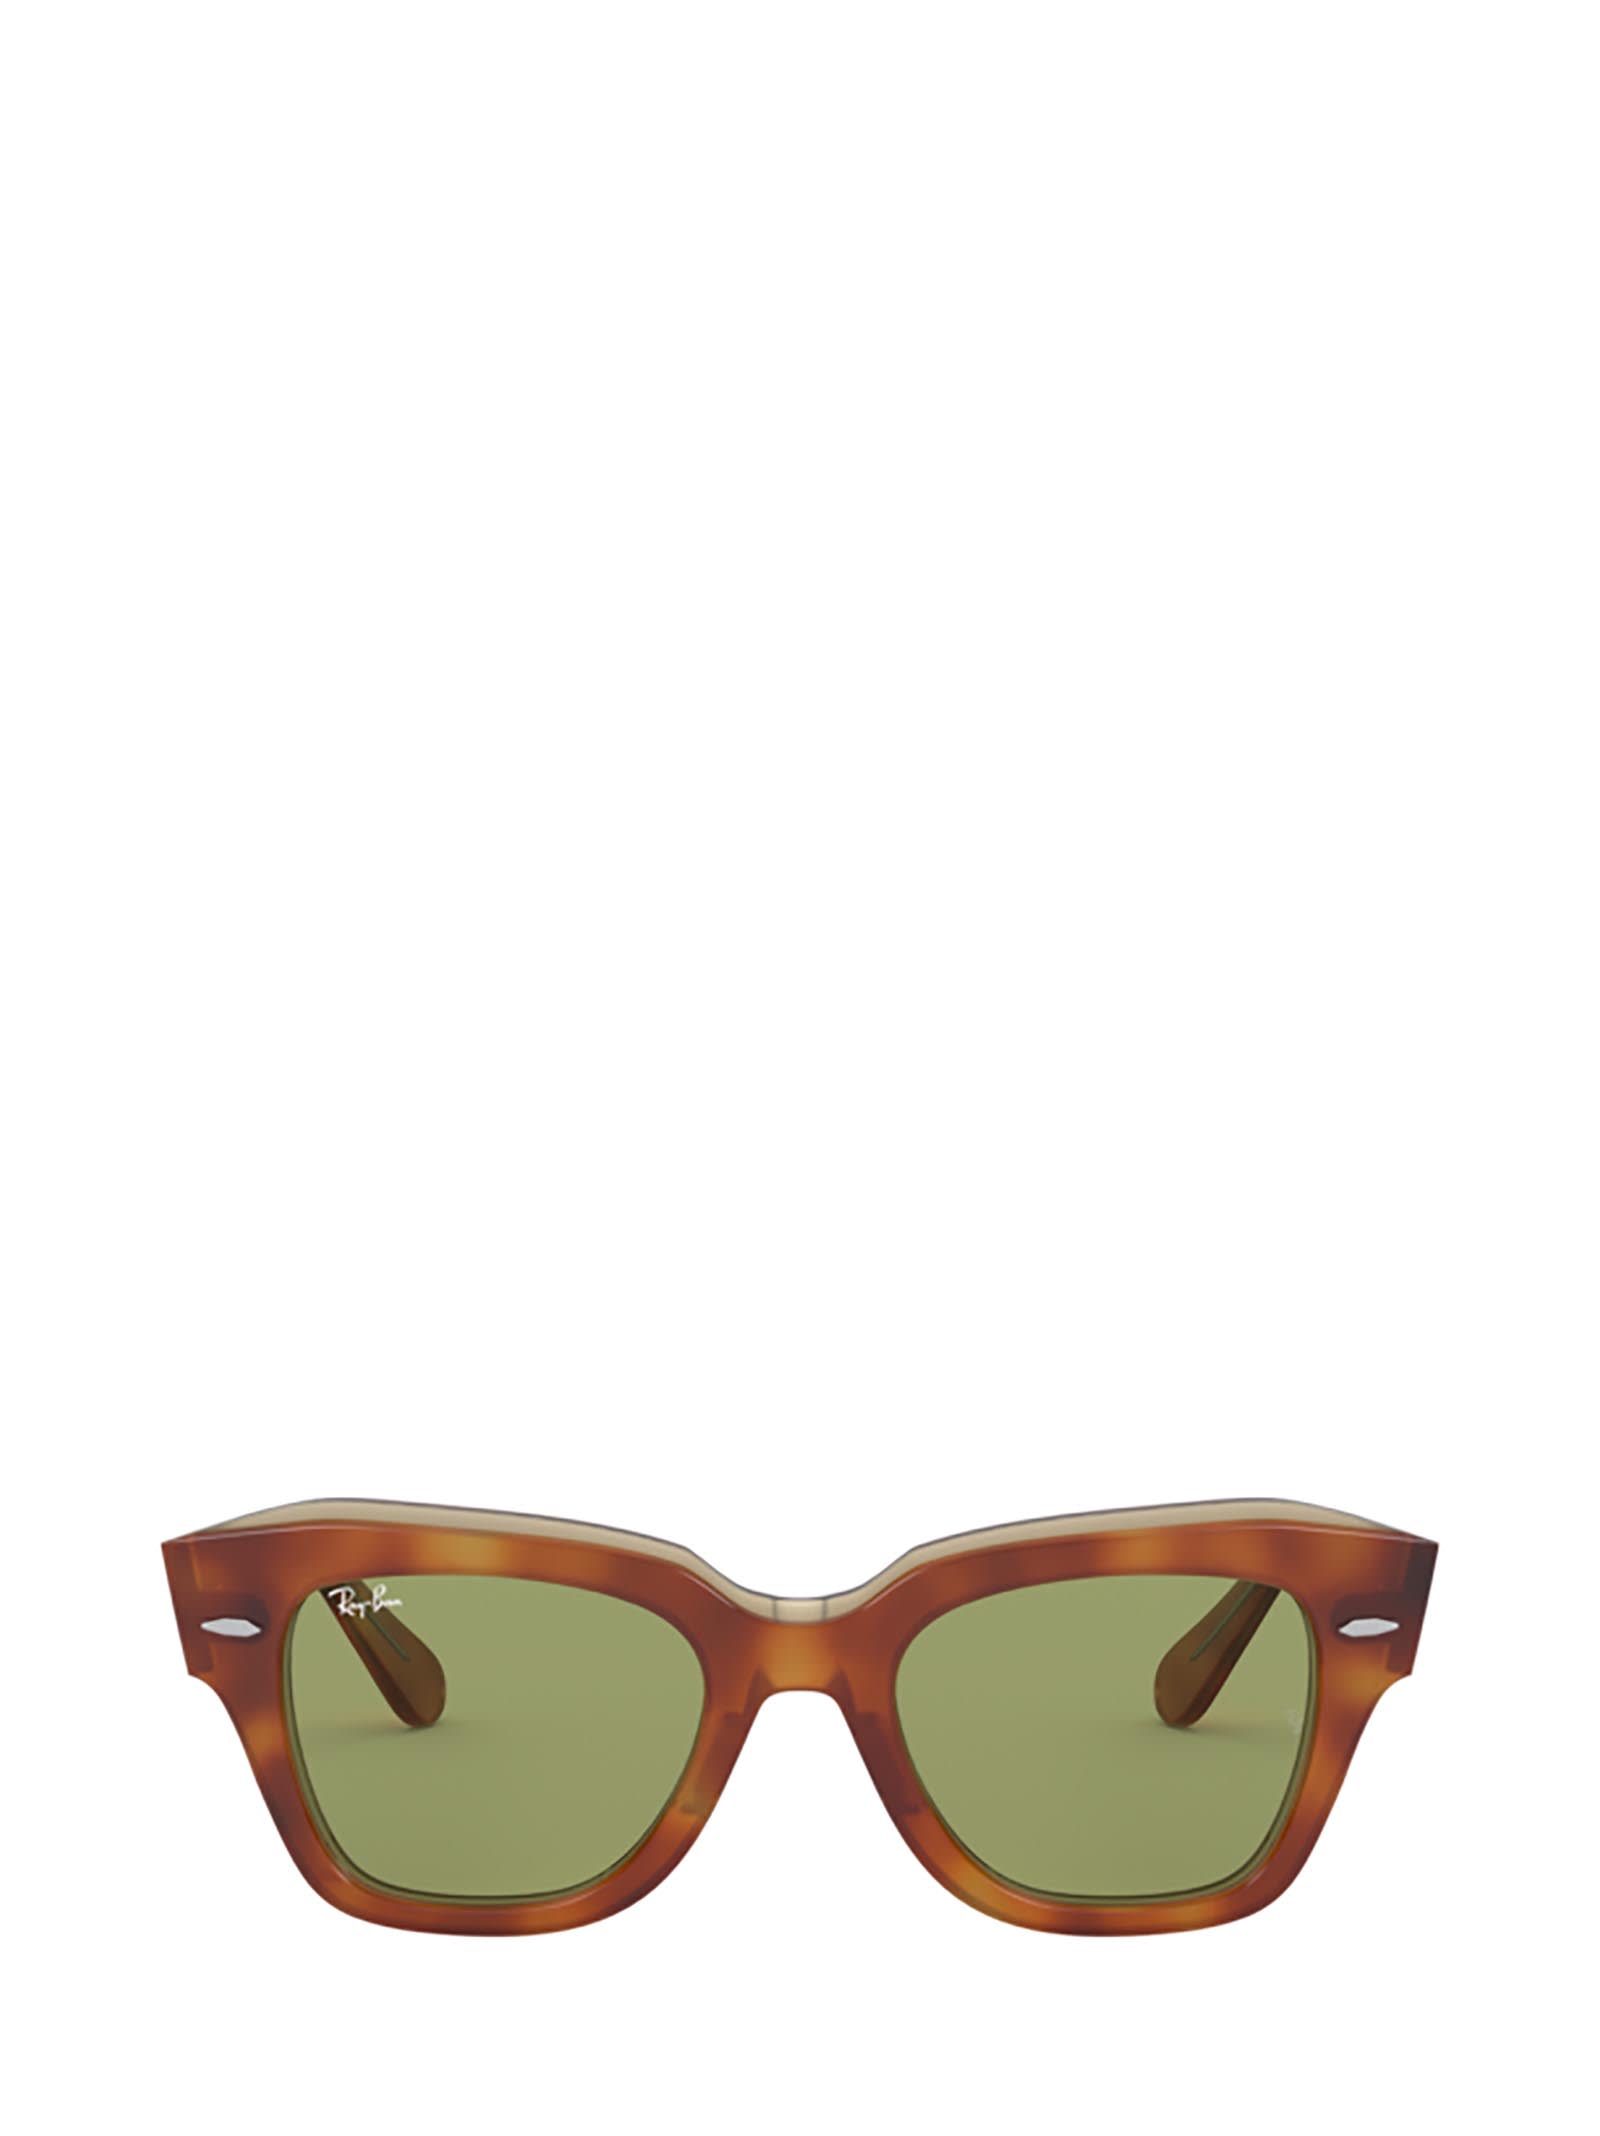 RAY BAN RAY-BAN RB2186 TOP TORTOISE / TRANSPARENT BEIGE SUNGLASSES,11280205